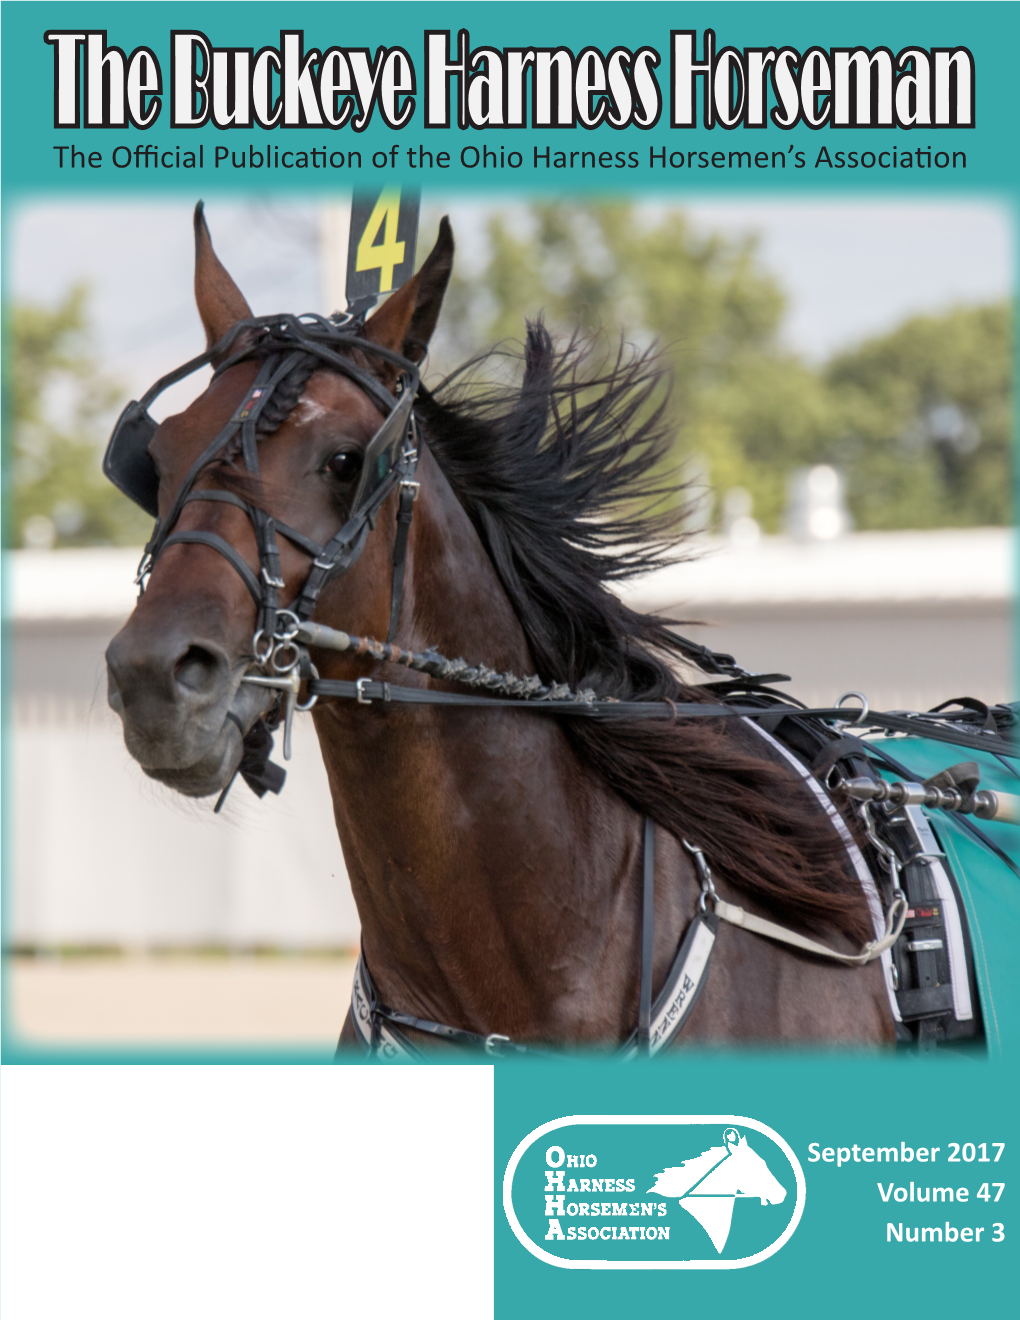 The Official Publication of the Ohio Harness Horsemen's Association